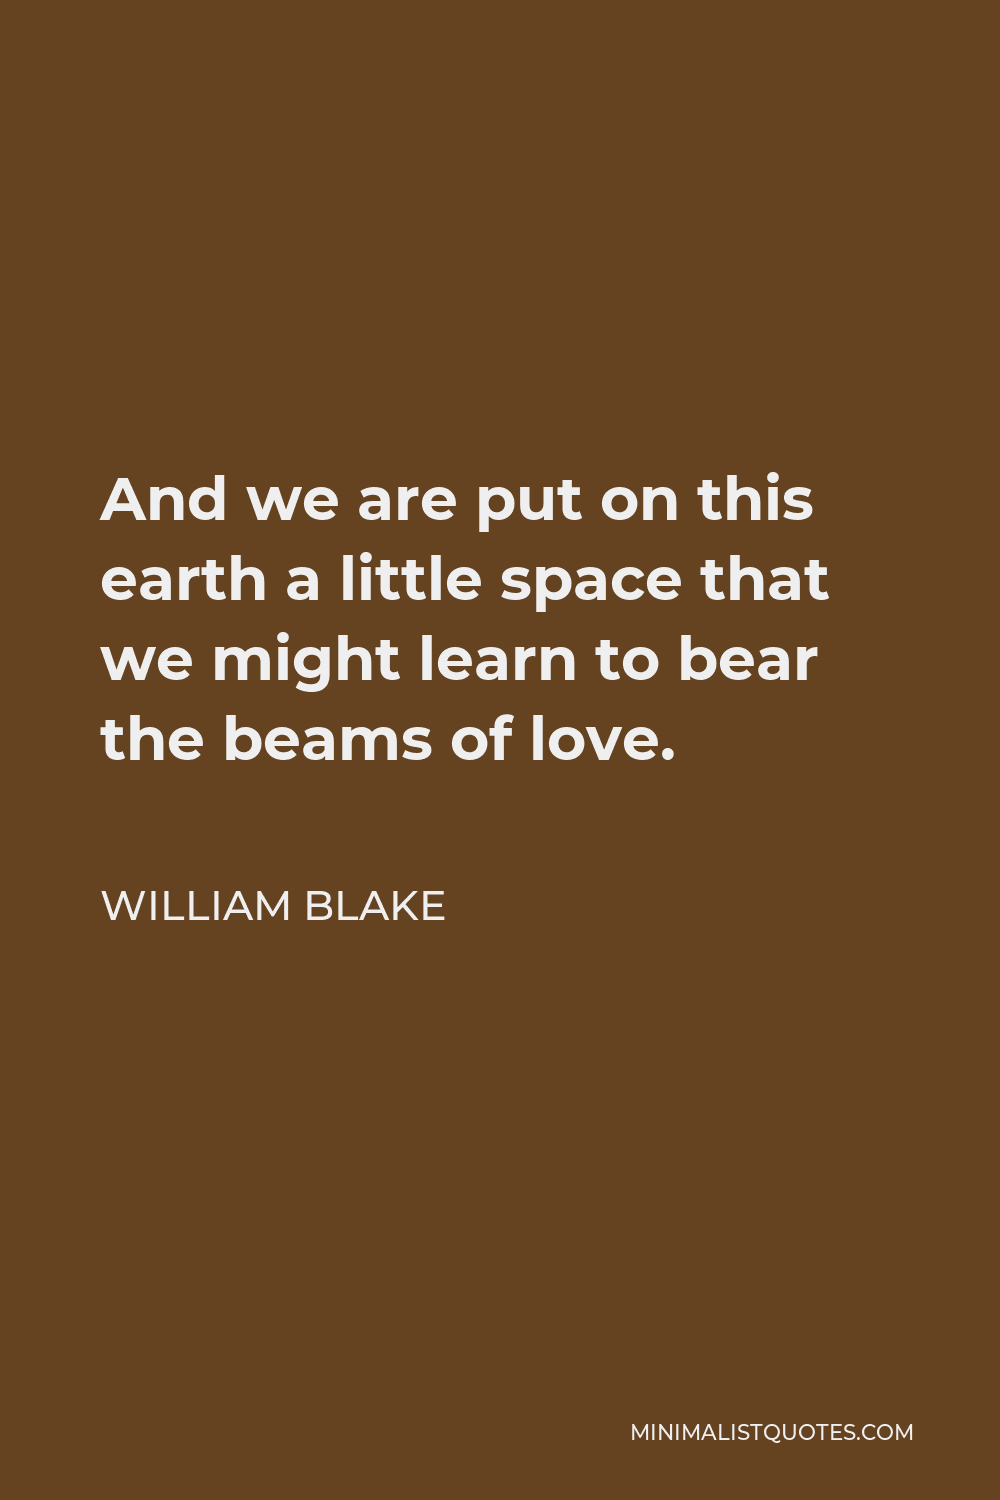 William Blake Quote - And we are put on this earth a little space that we might learn to bear the beams of love.